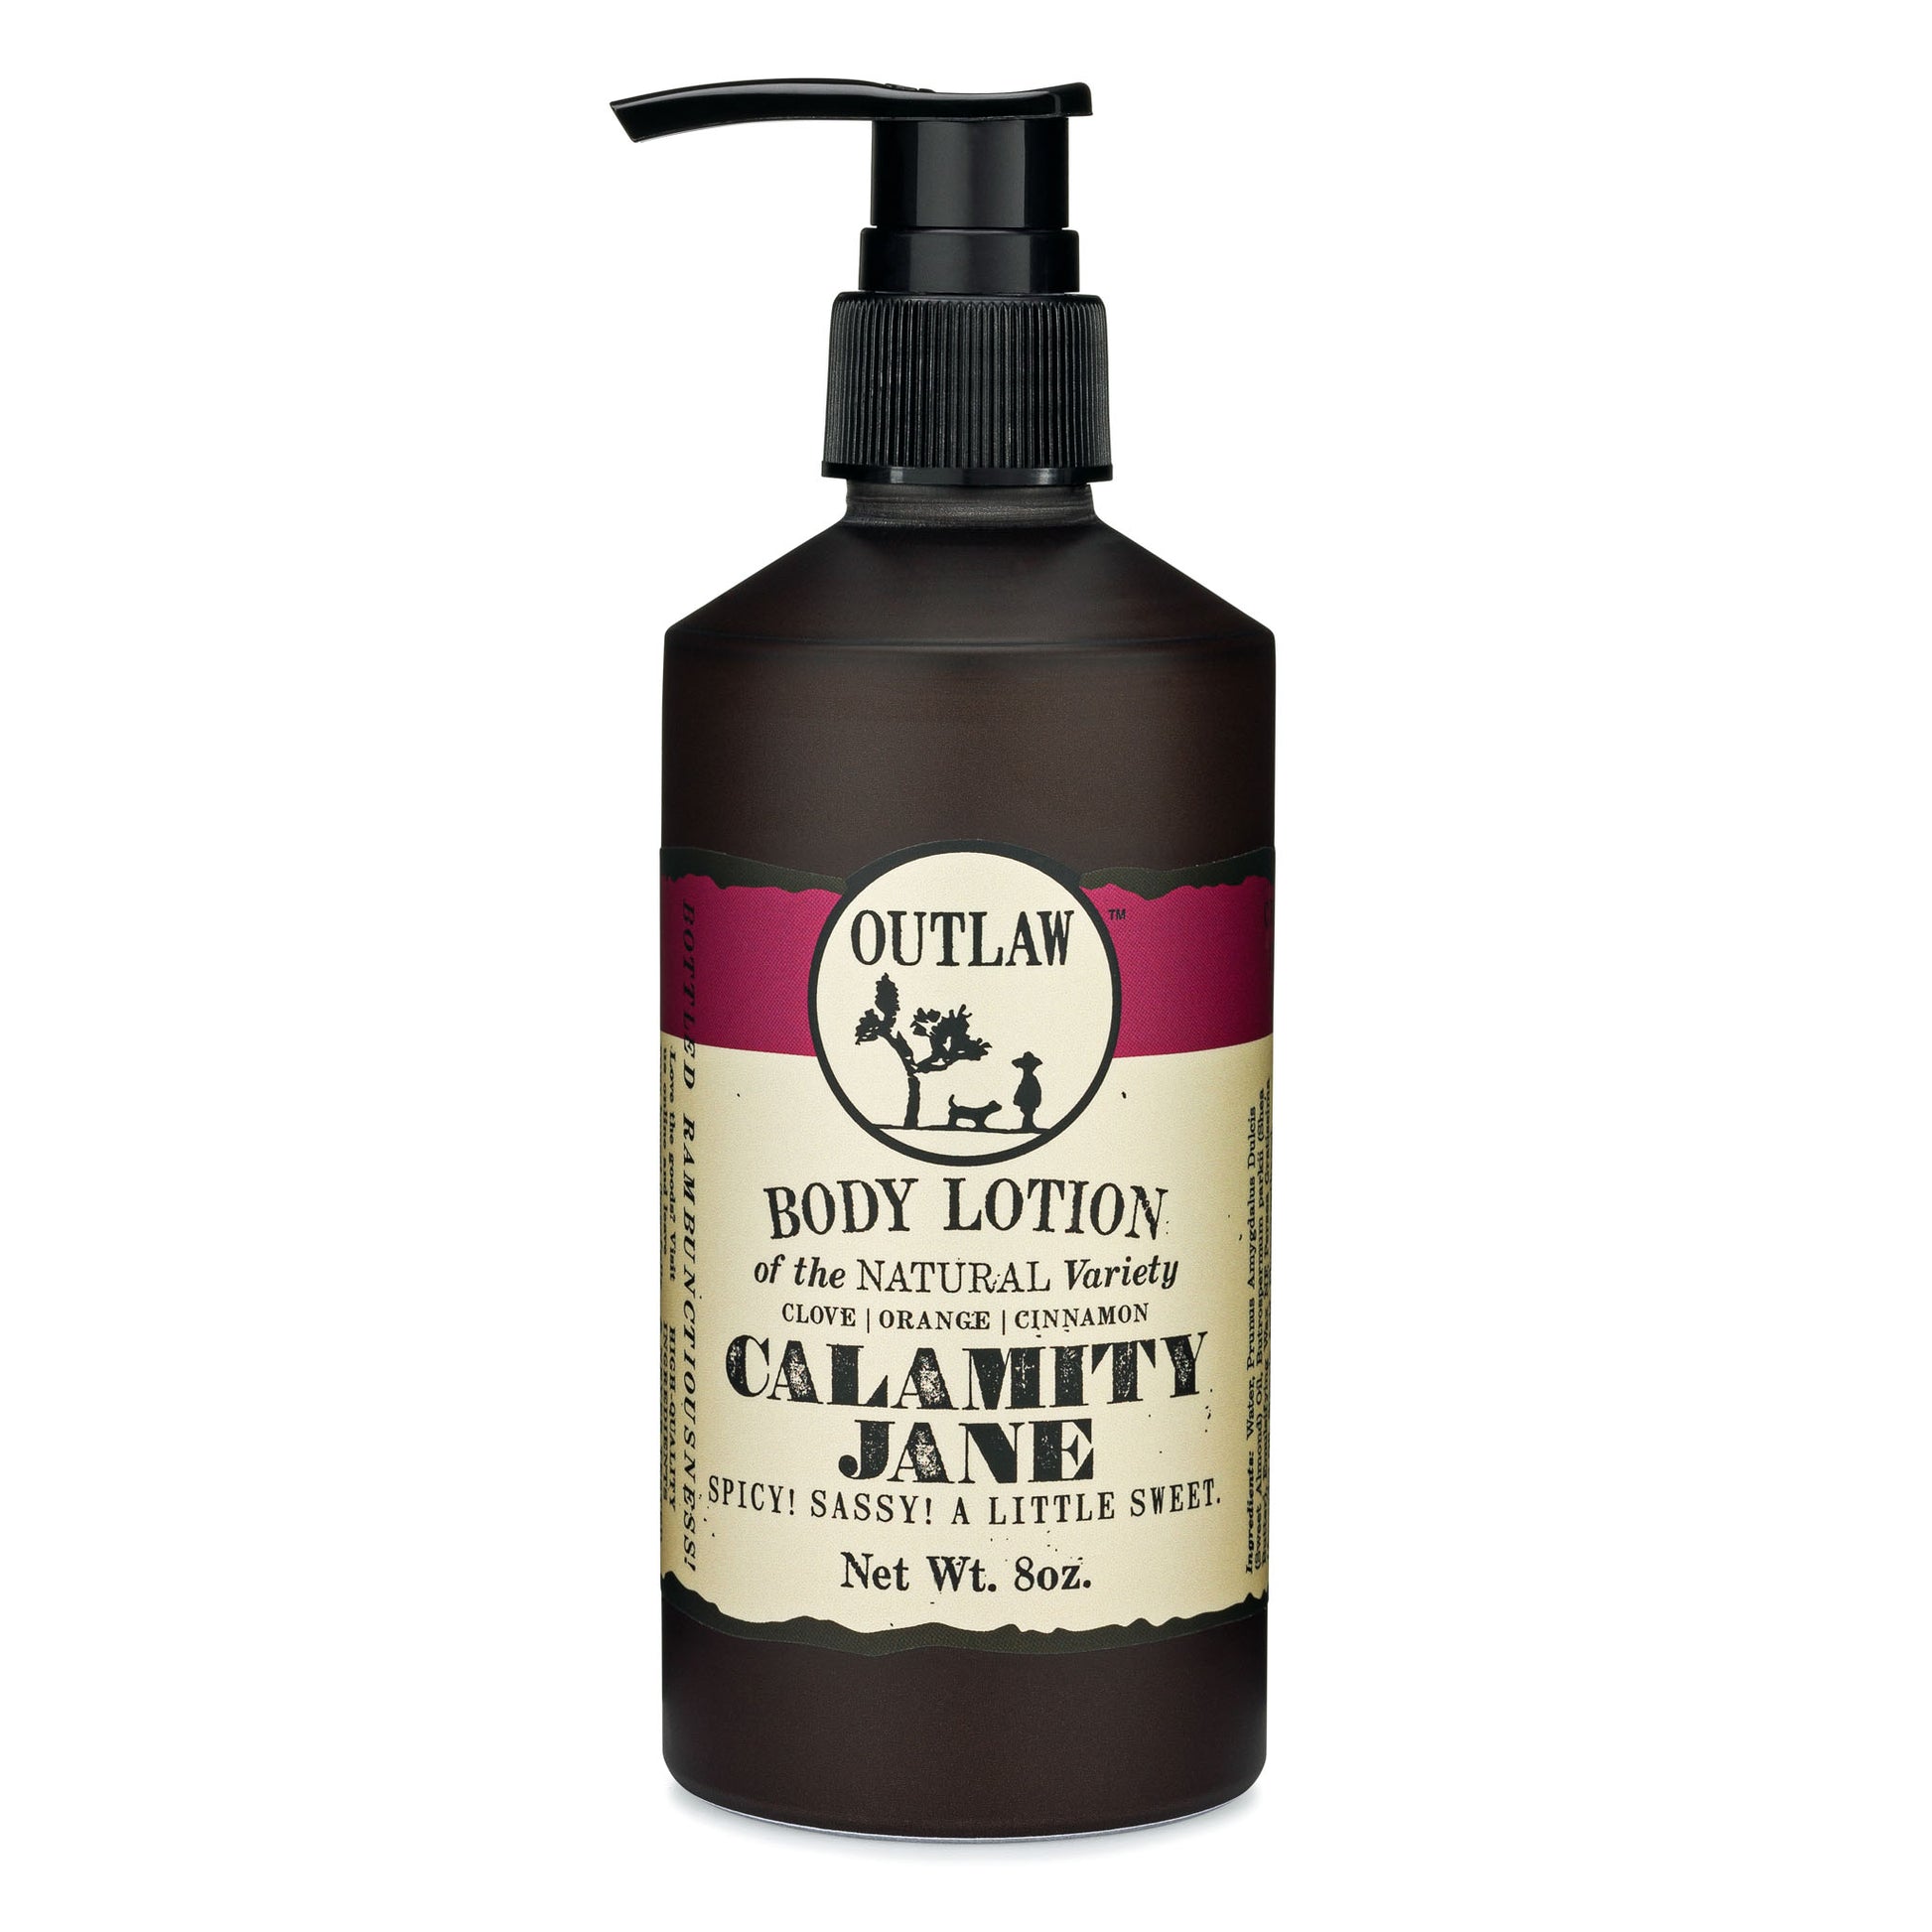 Outlaw Calamity Jane orange and whiskey scented natural body lotion